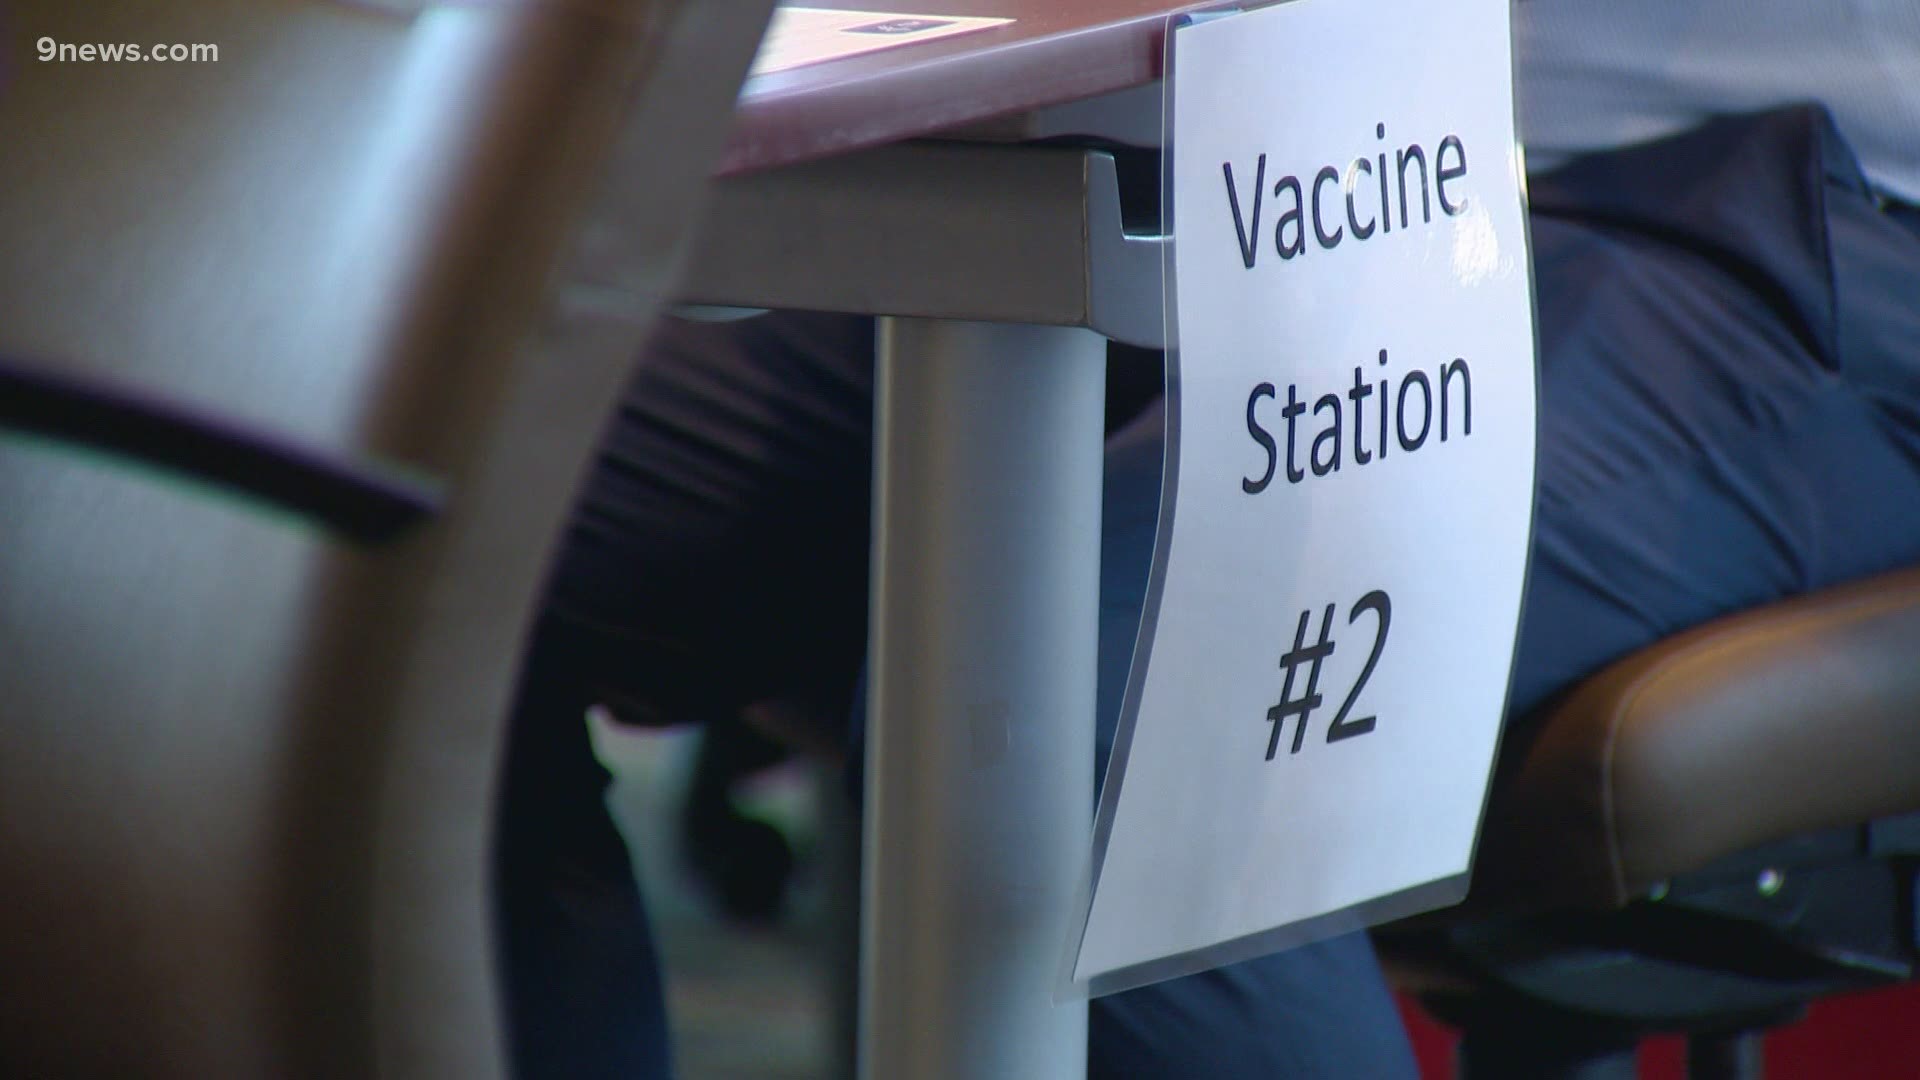 A 71-year-old in Parker has been trying to get the COVID-19 vaccine, but he's still waiting for an appointment.